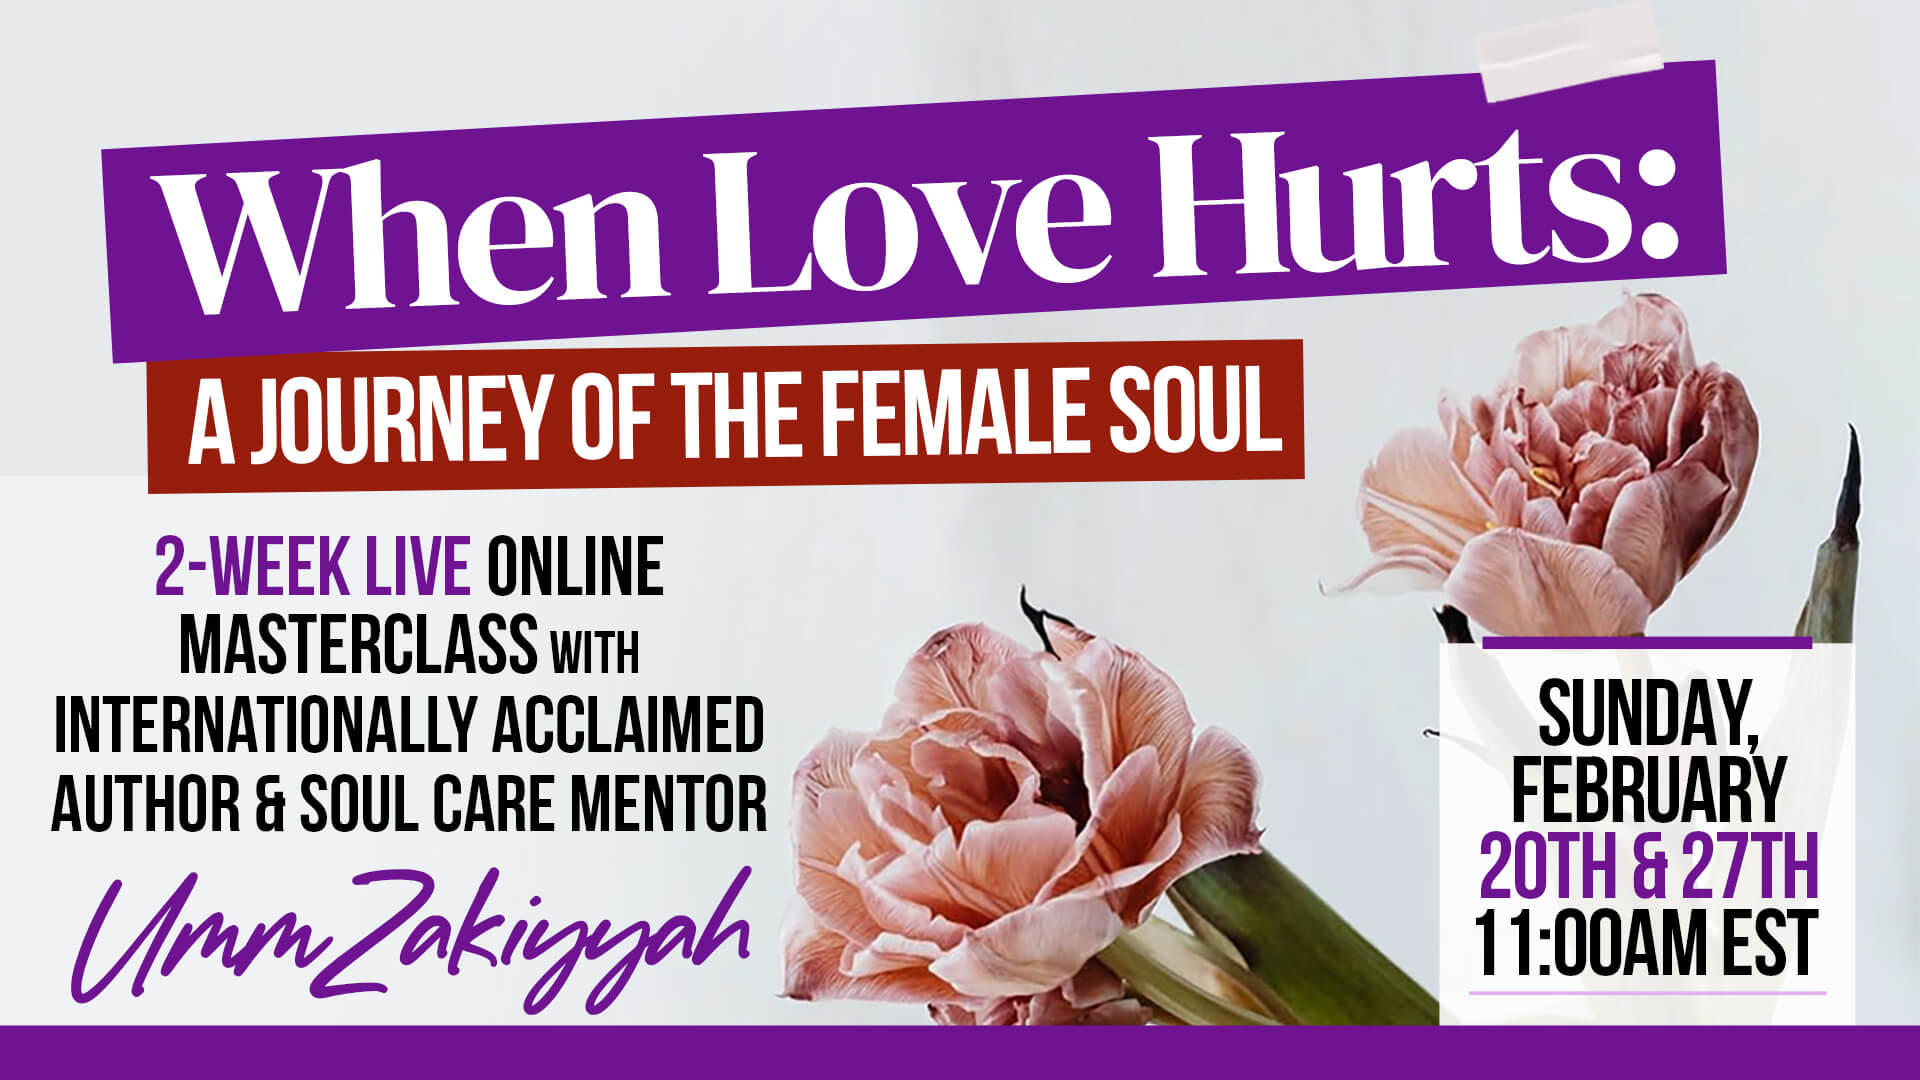 When Love Hurts: Journey of the Female Soul